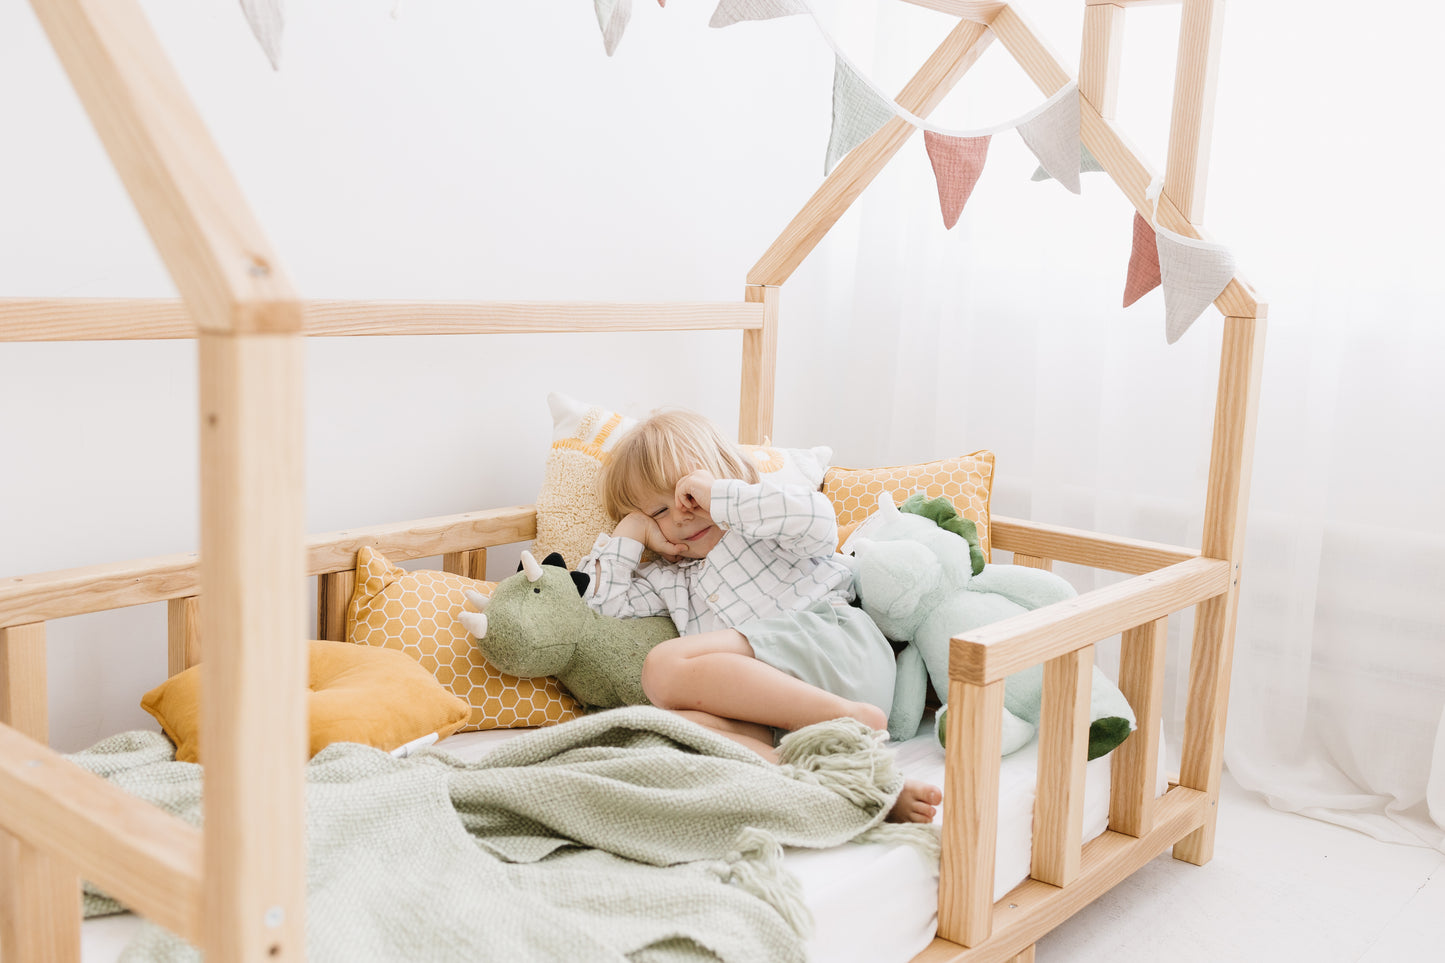 Wooden Toddler Bed “House”